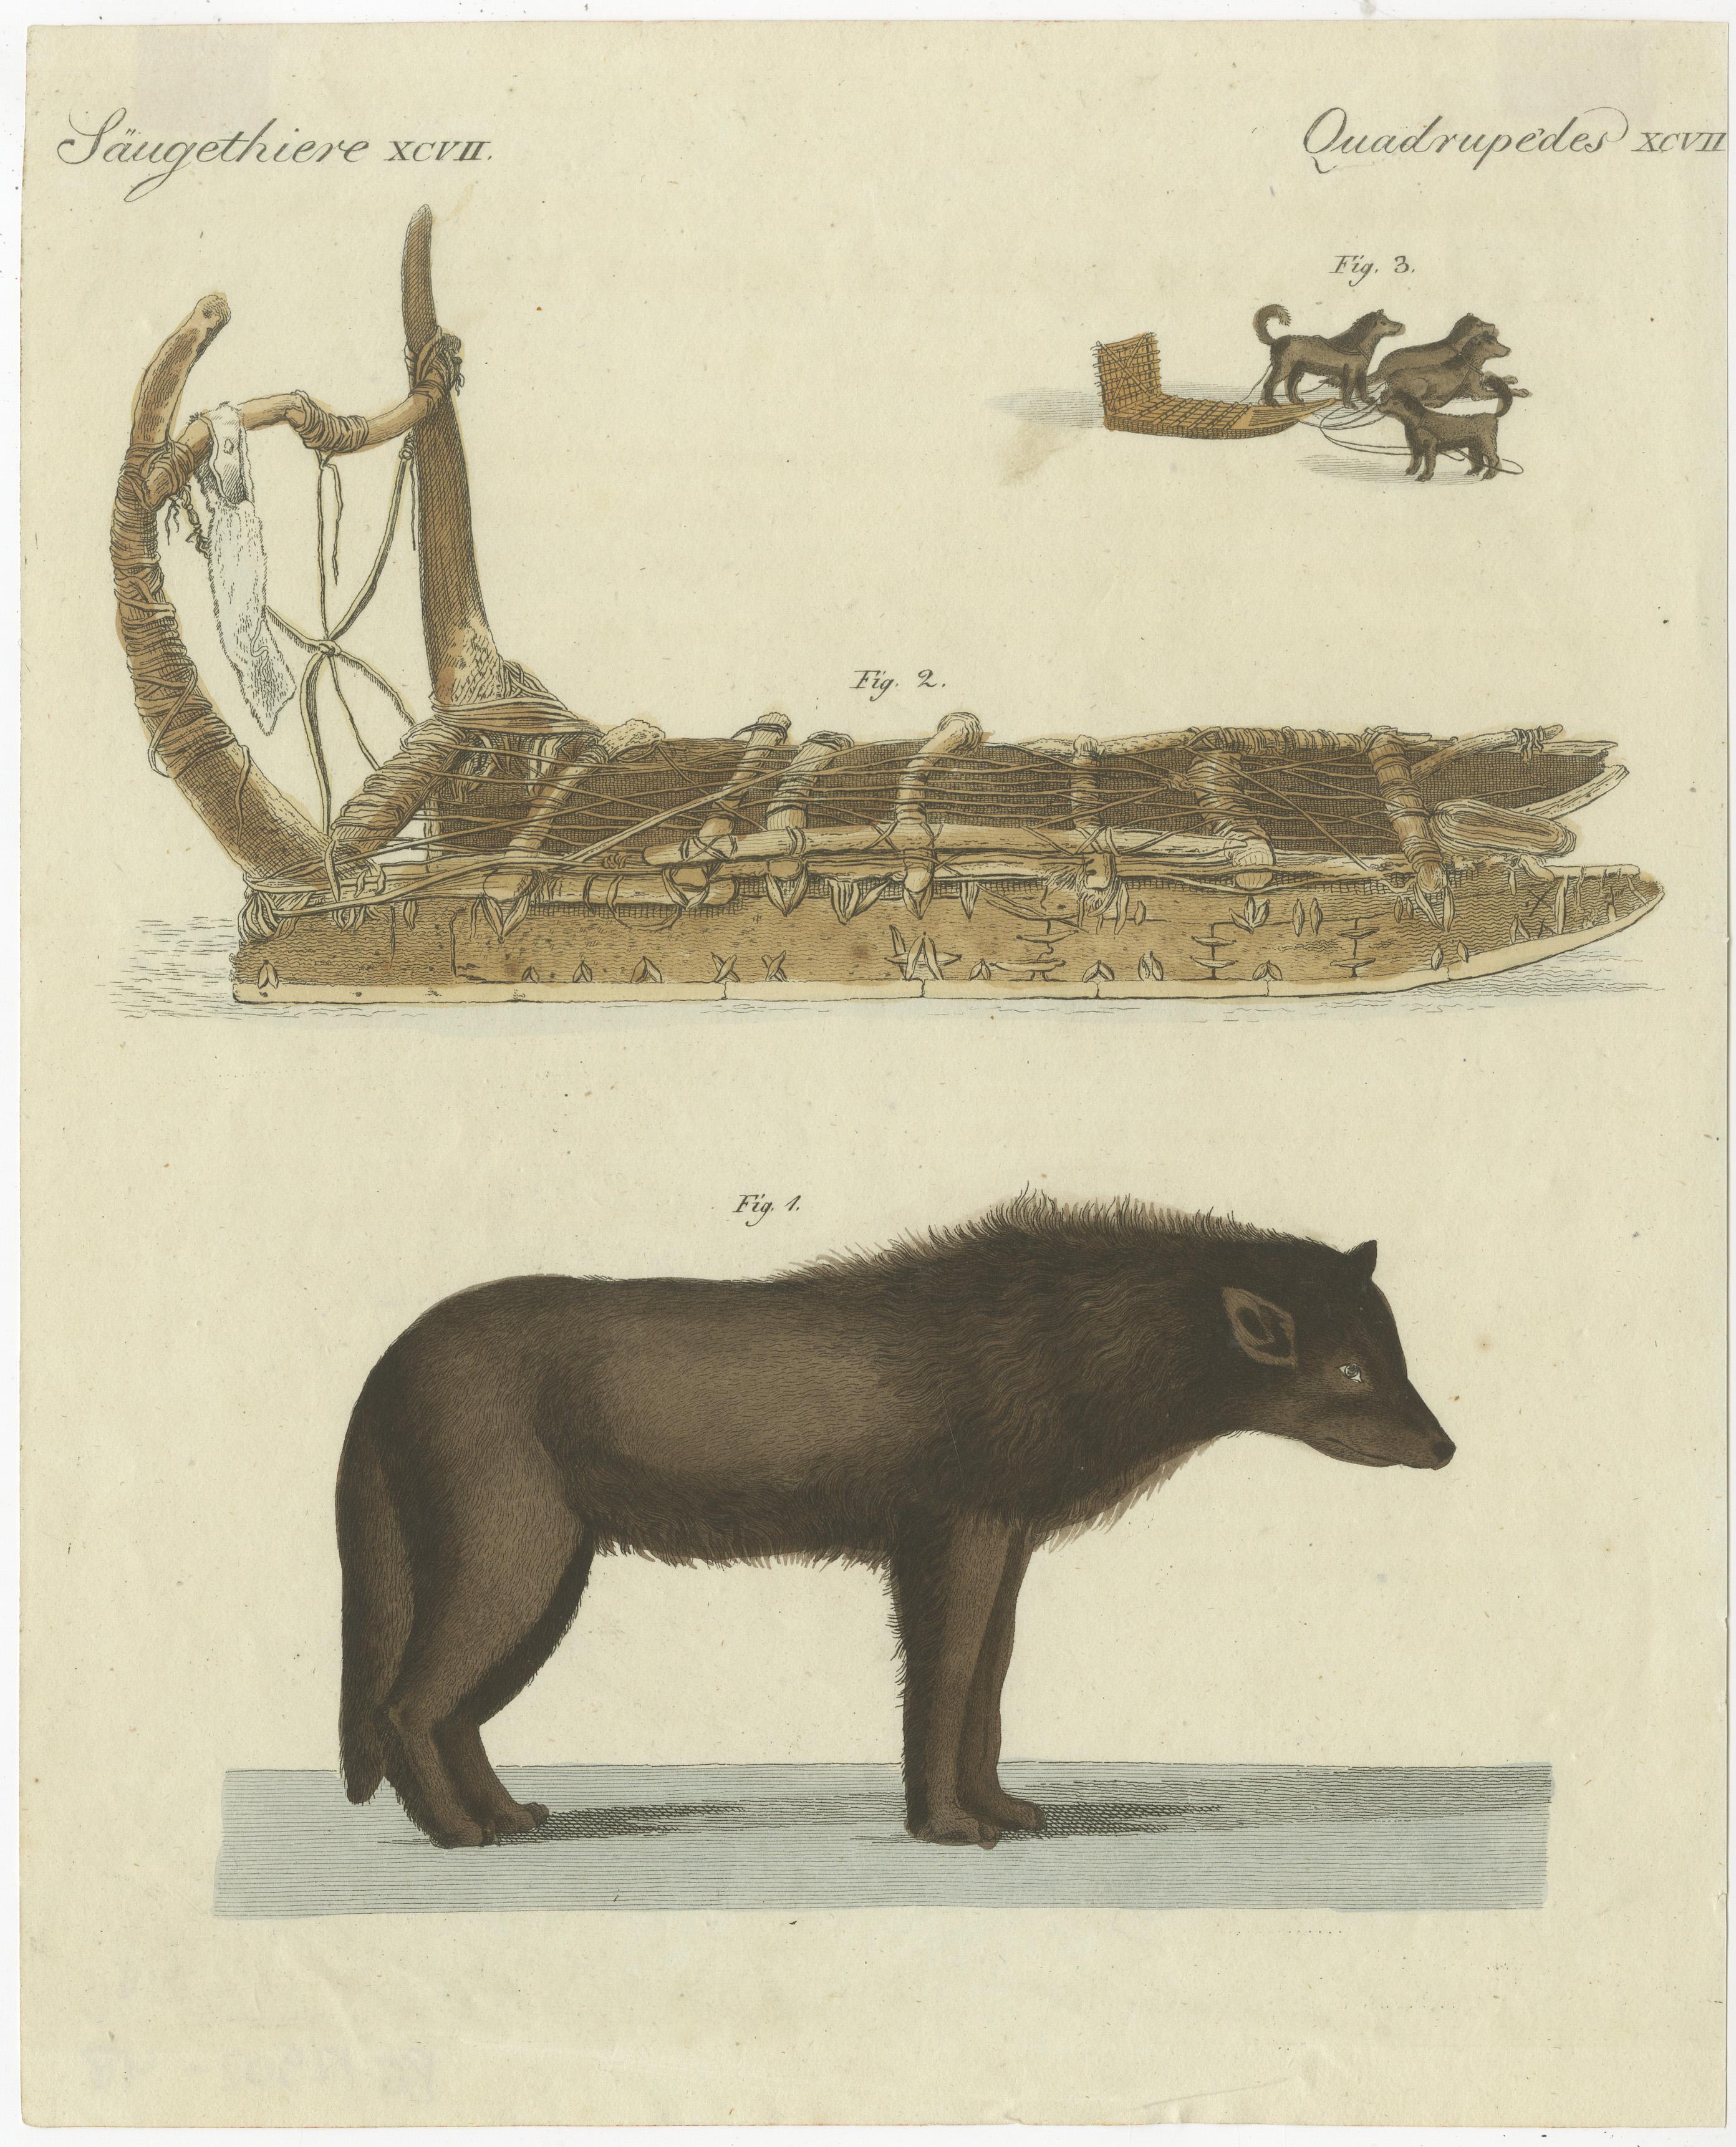 Antique print of a dog from Baffin Bay, located between Baffin Island and the west coast of Greenland. Top image shows a dog sled. This print originates from 'Bilderbuch fur Kinder' by F.J. Bertuch. Friedrich Johann Bertuch (1747-1822) was a German